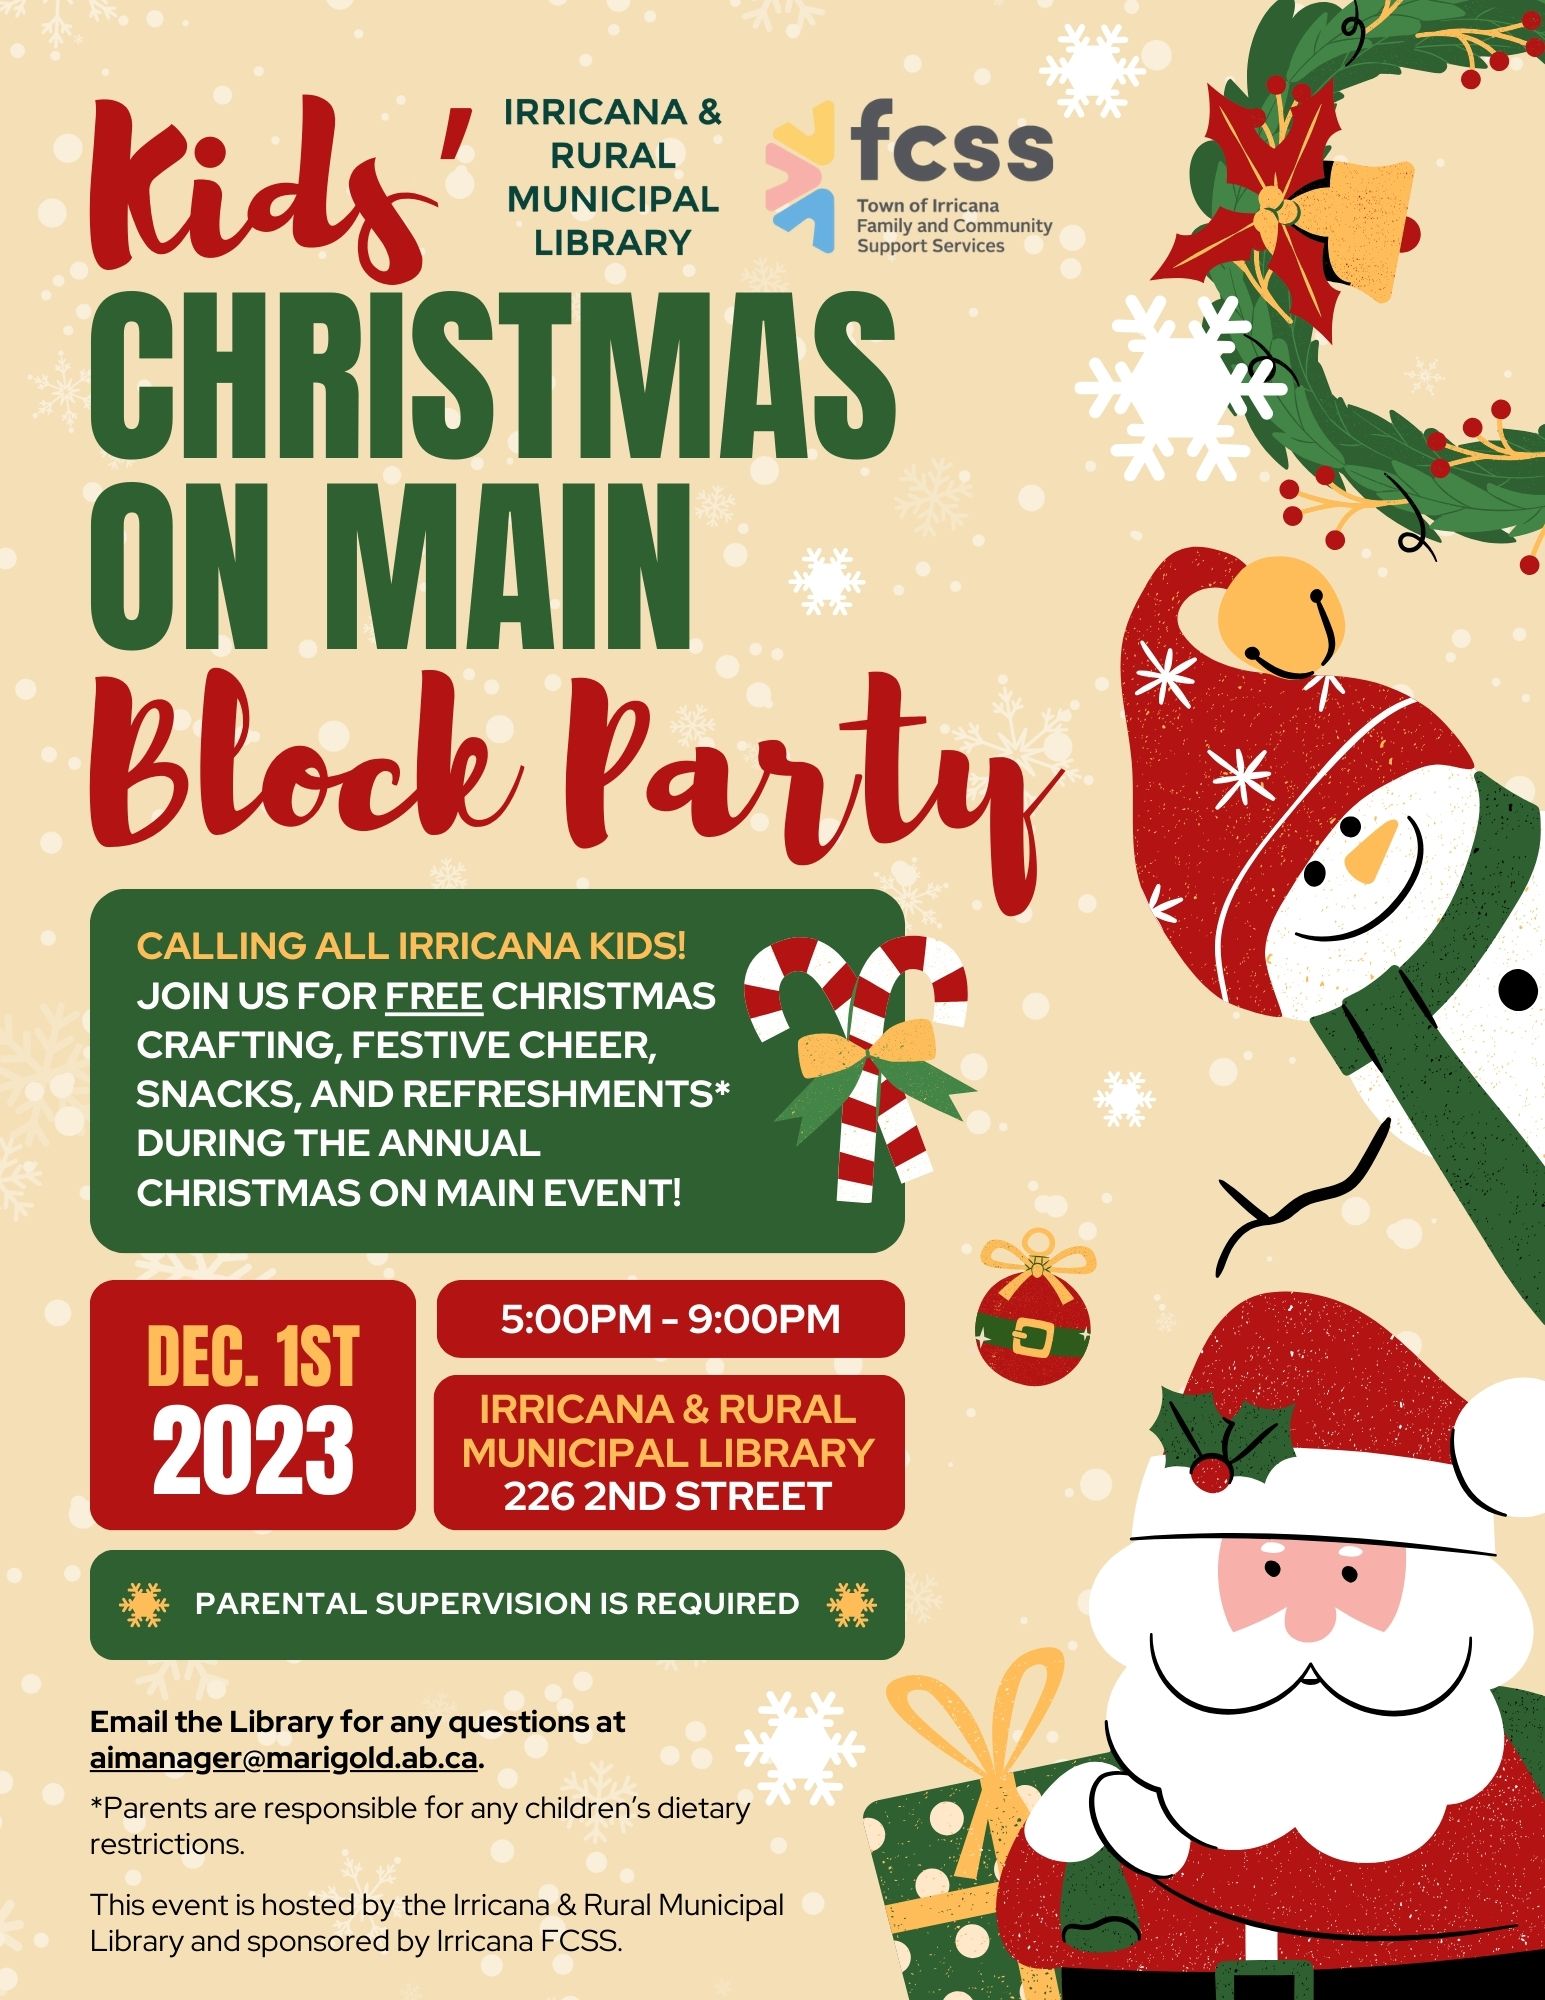 Irricana Library Kids Christmas on Main Block Party December 1, 2023